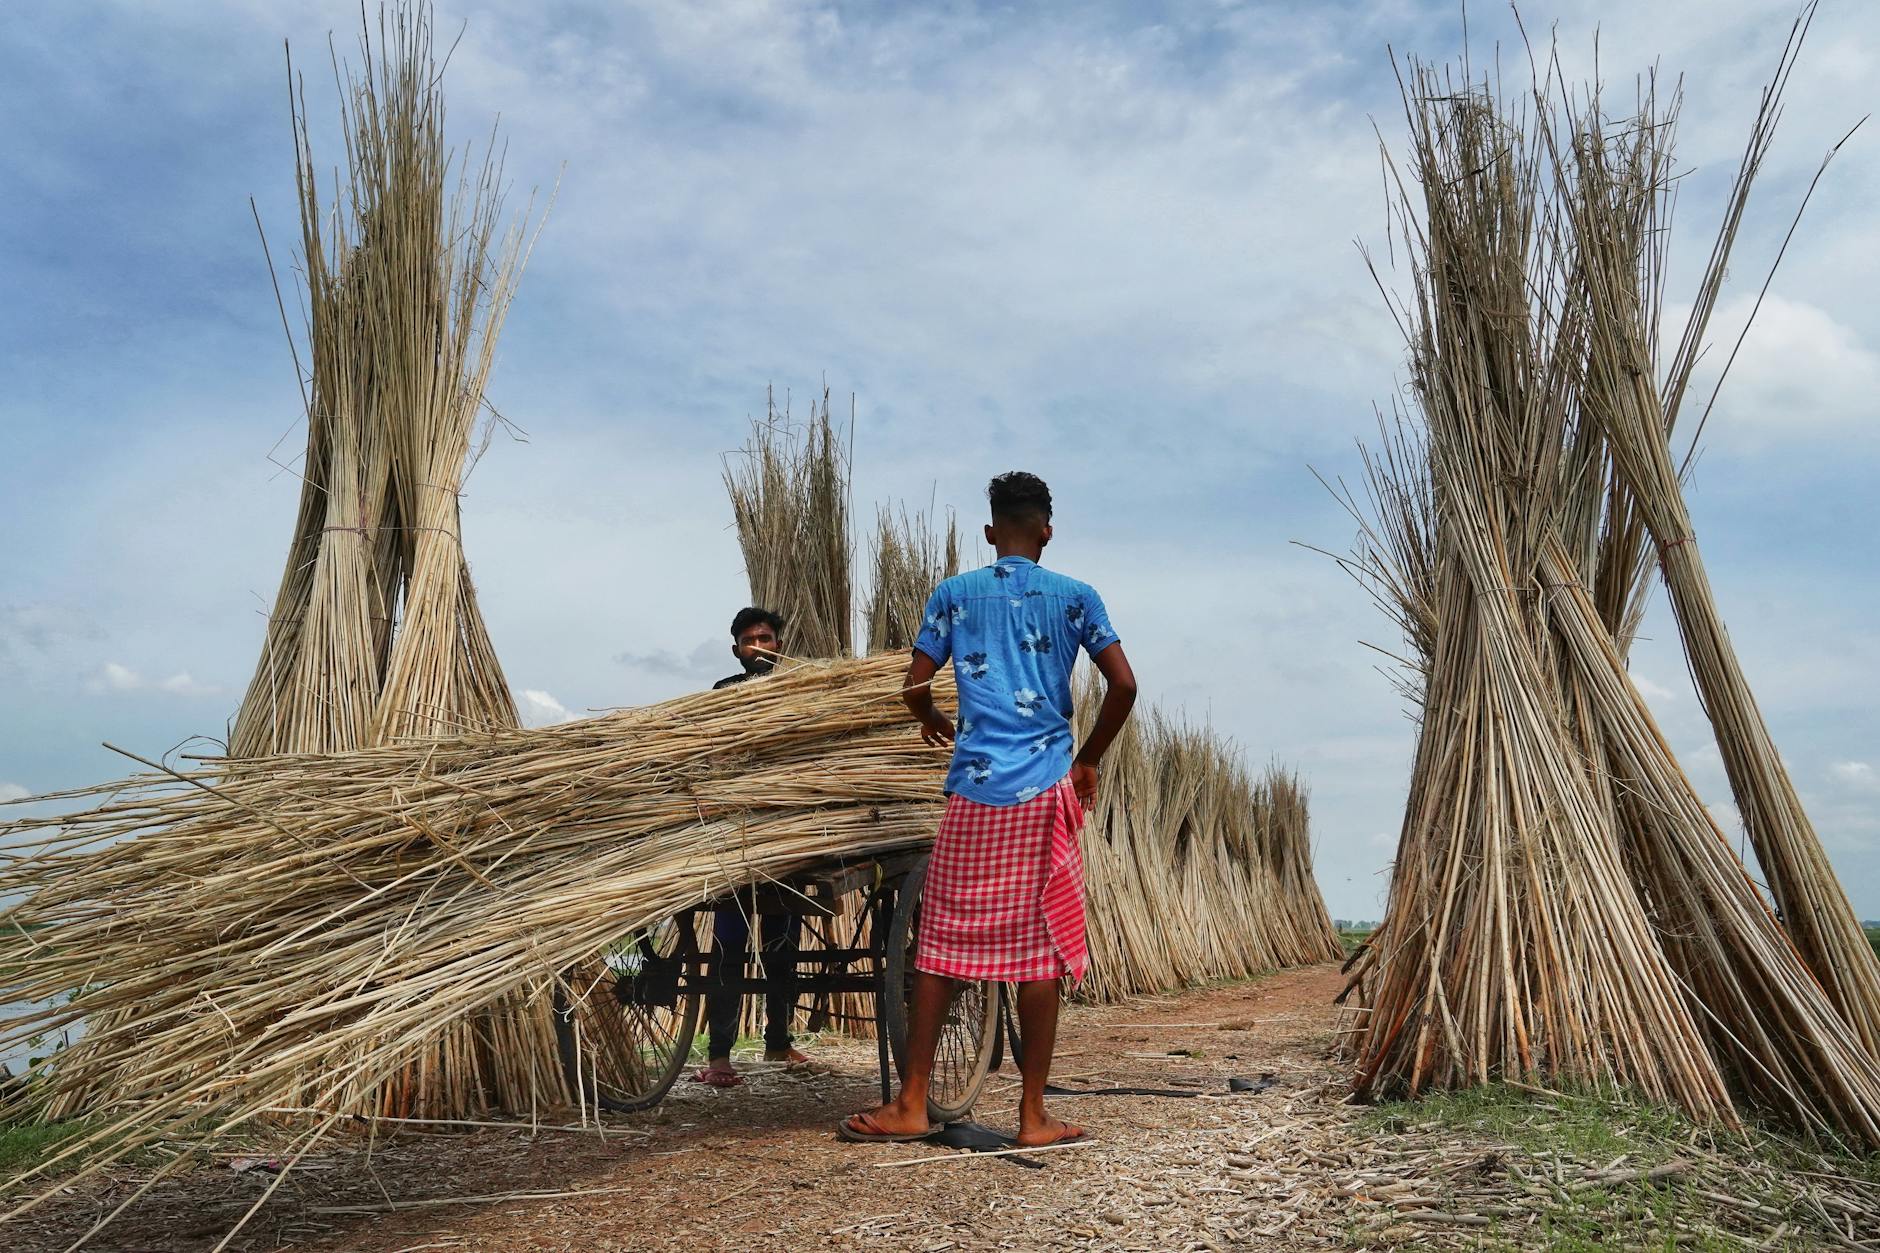 the low carbon footprint of jute begins with men harvesting and gathering jute in the fields